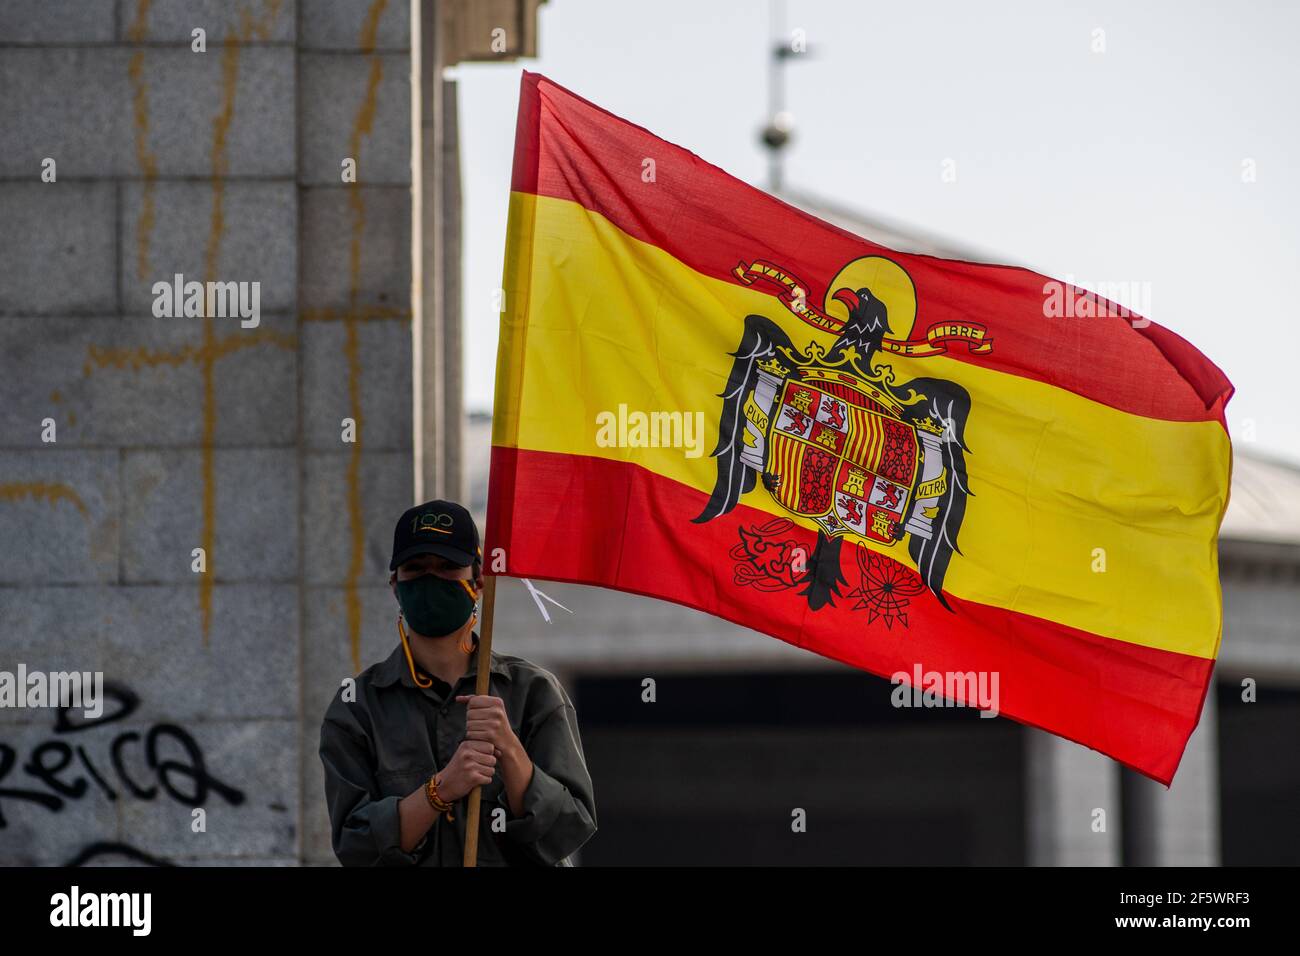 Madrid, Spain. 28th Mar, 2021. A supporter of Franco dictator holding a pre-constitutional Spanish flag during a gathering of far right wing supporters at Arco de la Victoria, commemorating the 82nd anniversary when dictator Francisco Franco and his forces entered Madrid following the Spanish Coup of July 1936 against the 2nd Spanish Republic. Credit: Marcos del Mazo/Alamy Live News Stock Photo